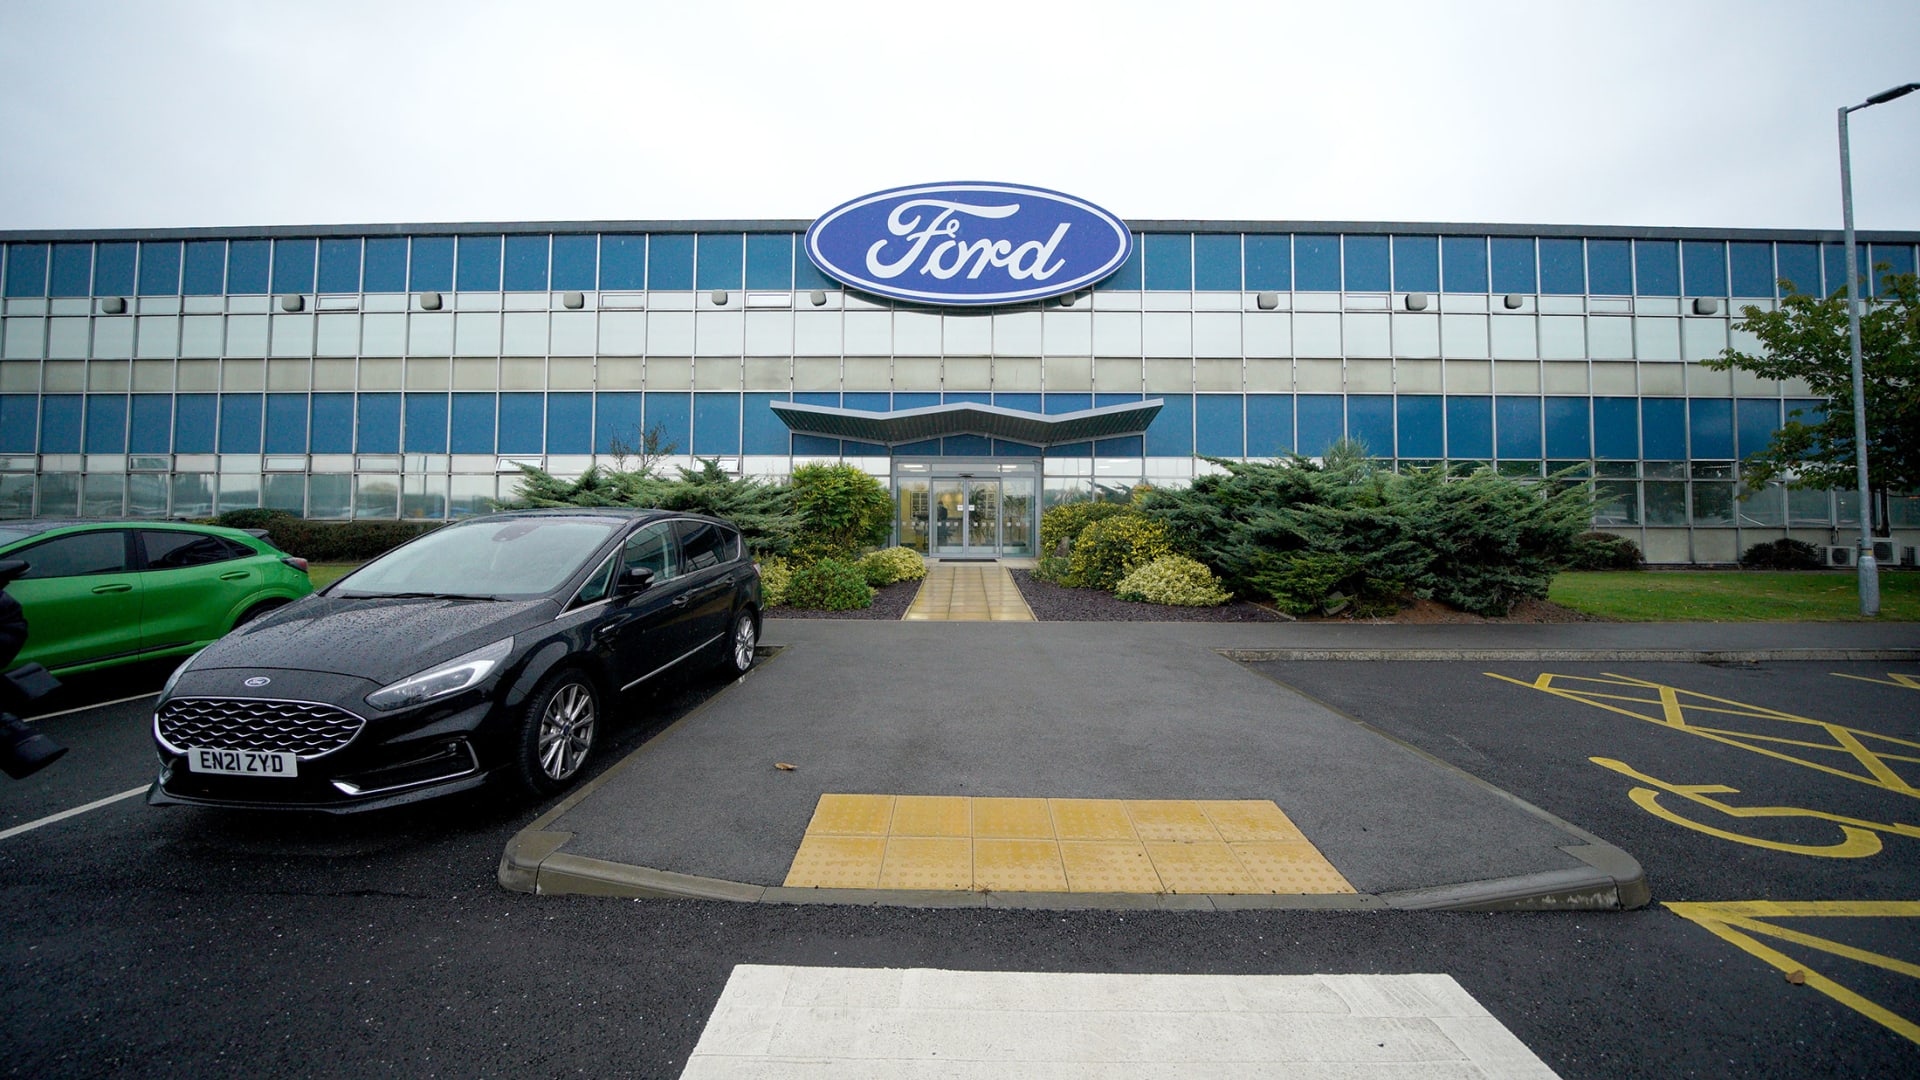 Ford Just Made a Stunning Announcement. Here's What It Means for Customers